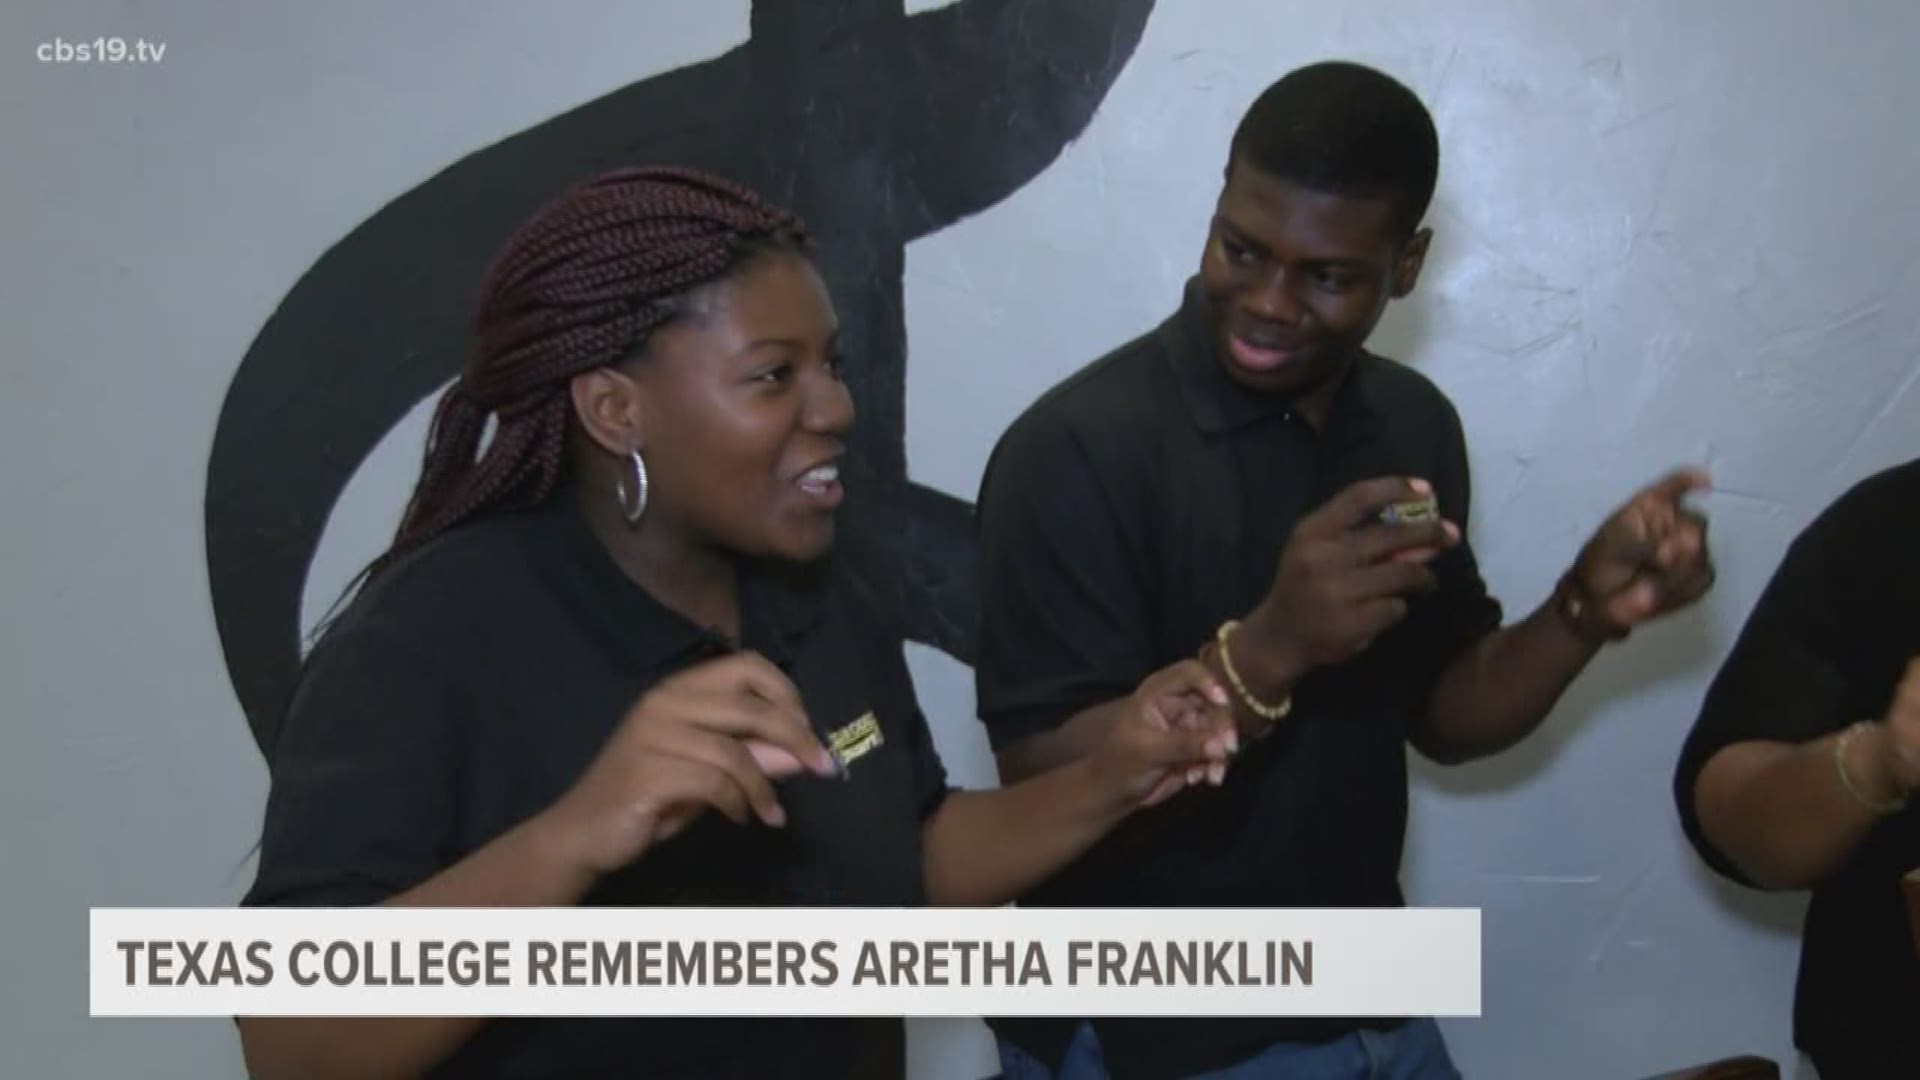 Students in the Texas College choir sang Aretha Franklin songs.